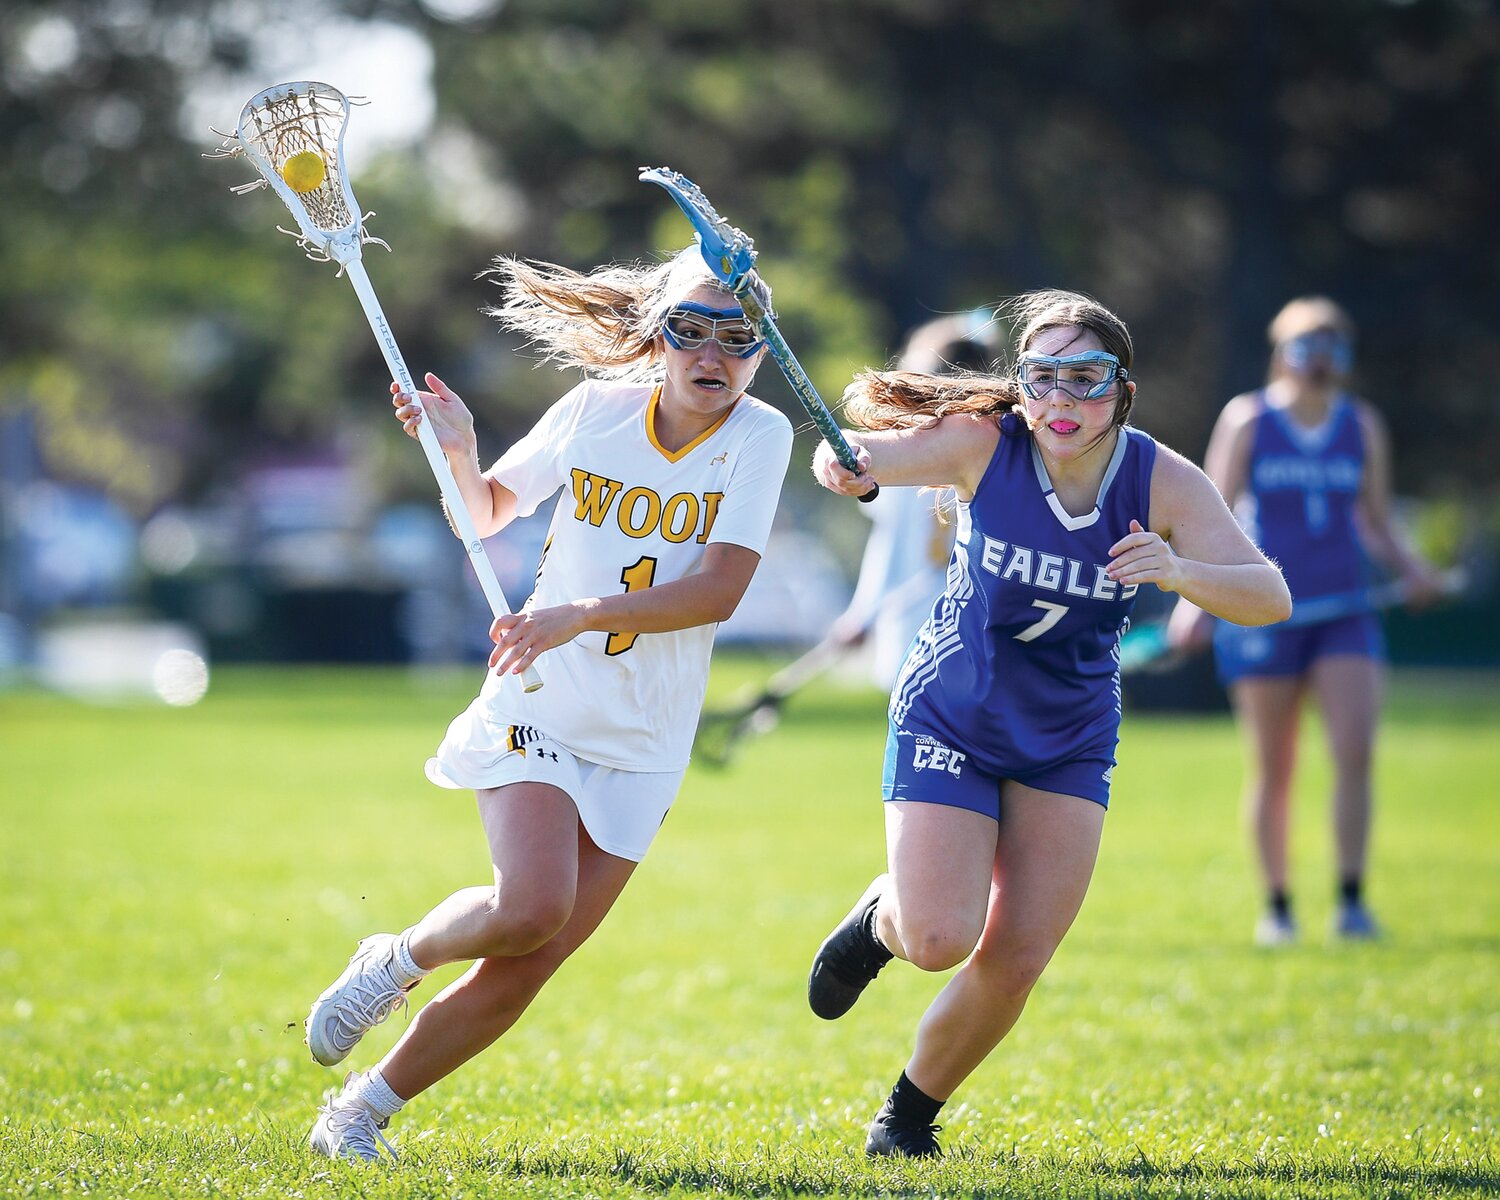 Archbishop Wood’s Cate DeGraw looks to shoot as she speeds around the attack of Conwell-Egan’s Lily Konnovitch.